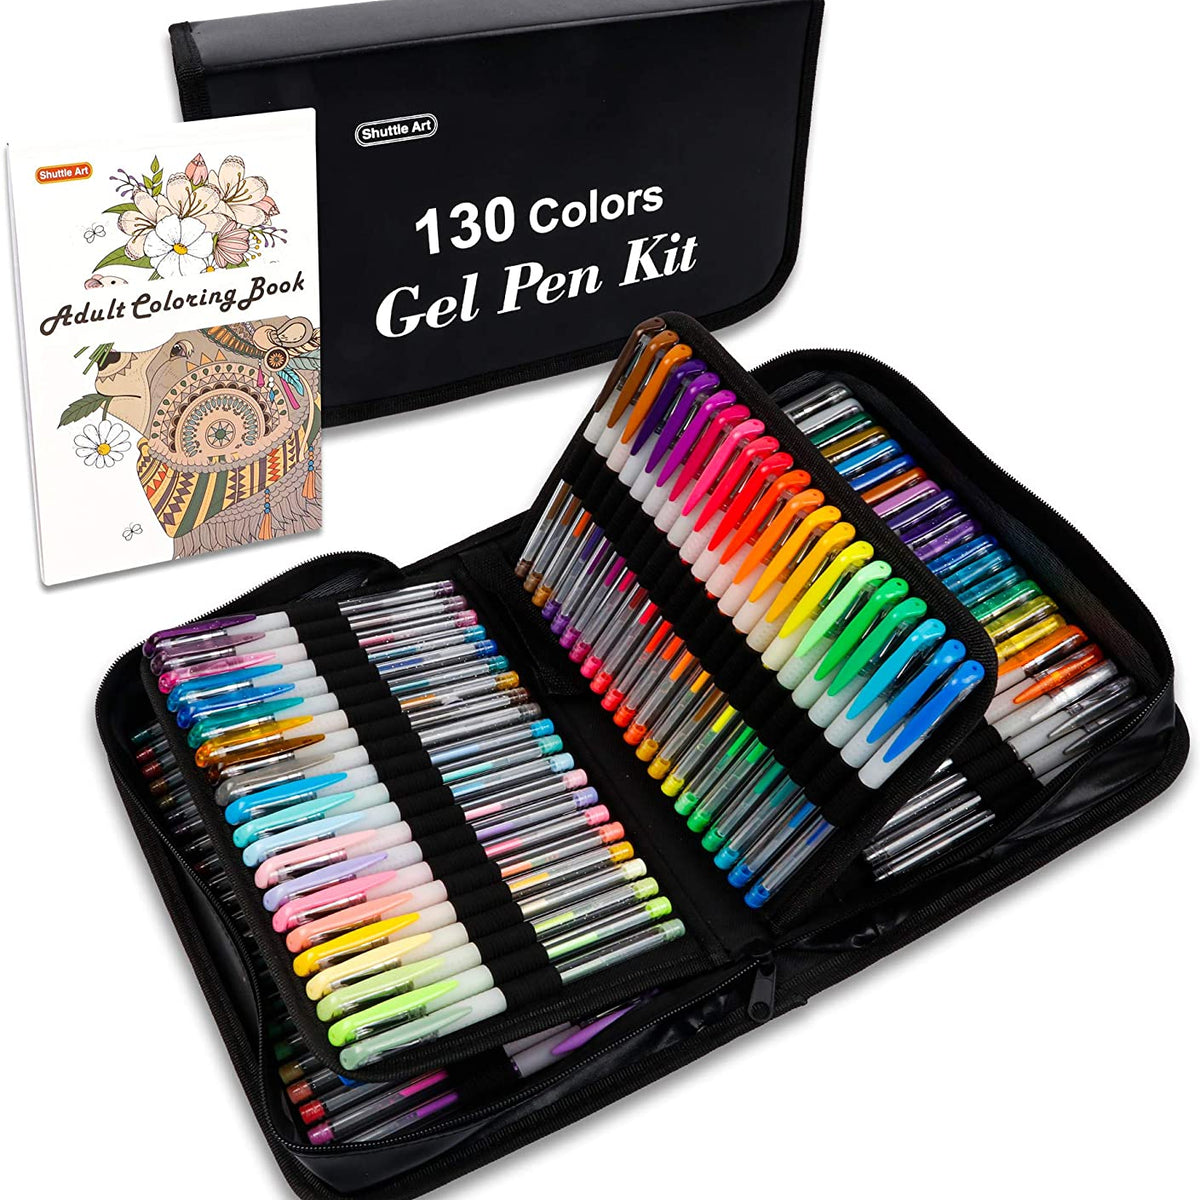  Shuttle Art Gel Pens, 120 Pack Gel Pen Set 60 Colored Gel Pen  with 60 Refills for Adults Coloring Books Drawing Doodling Crafts  Scrapbooking Journaling : Office Products